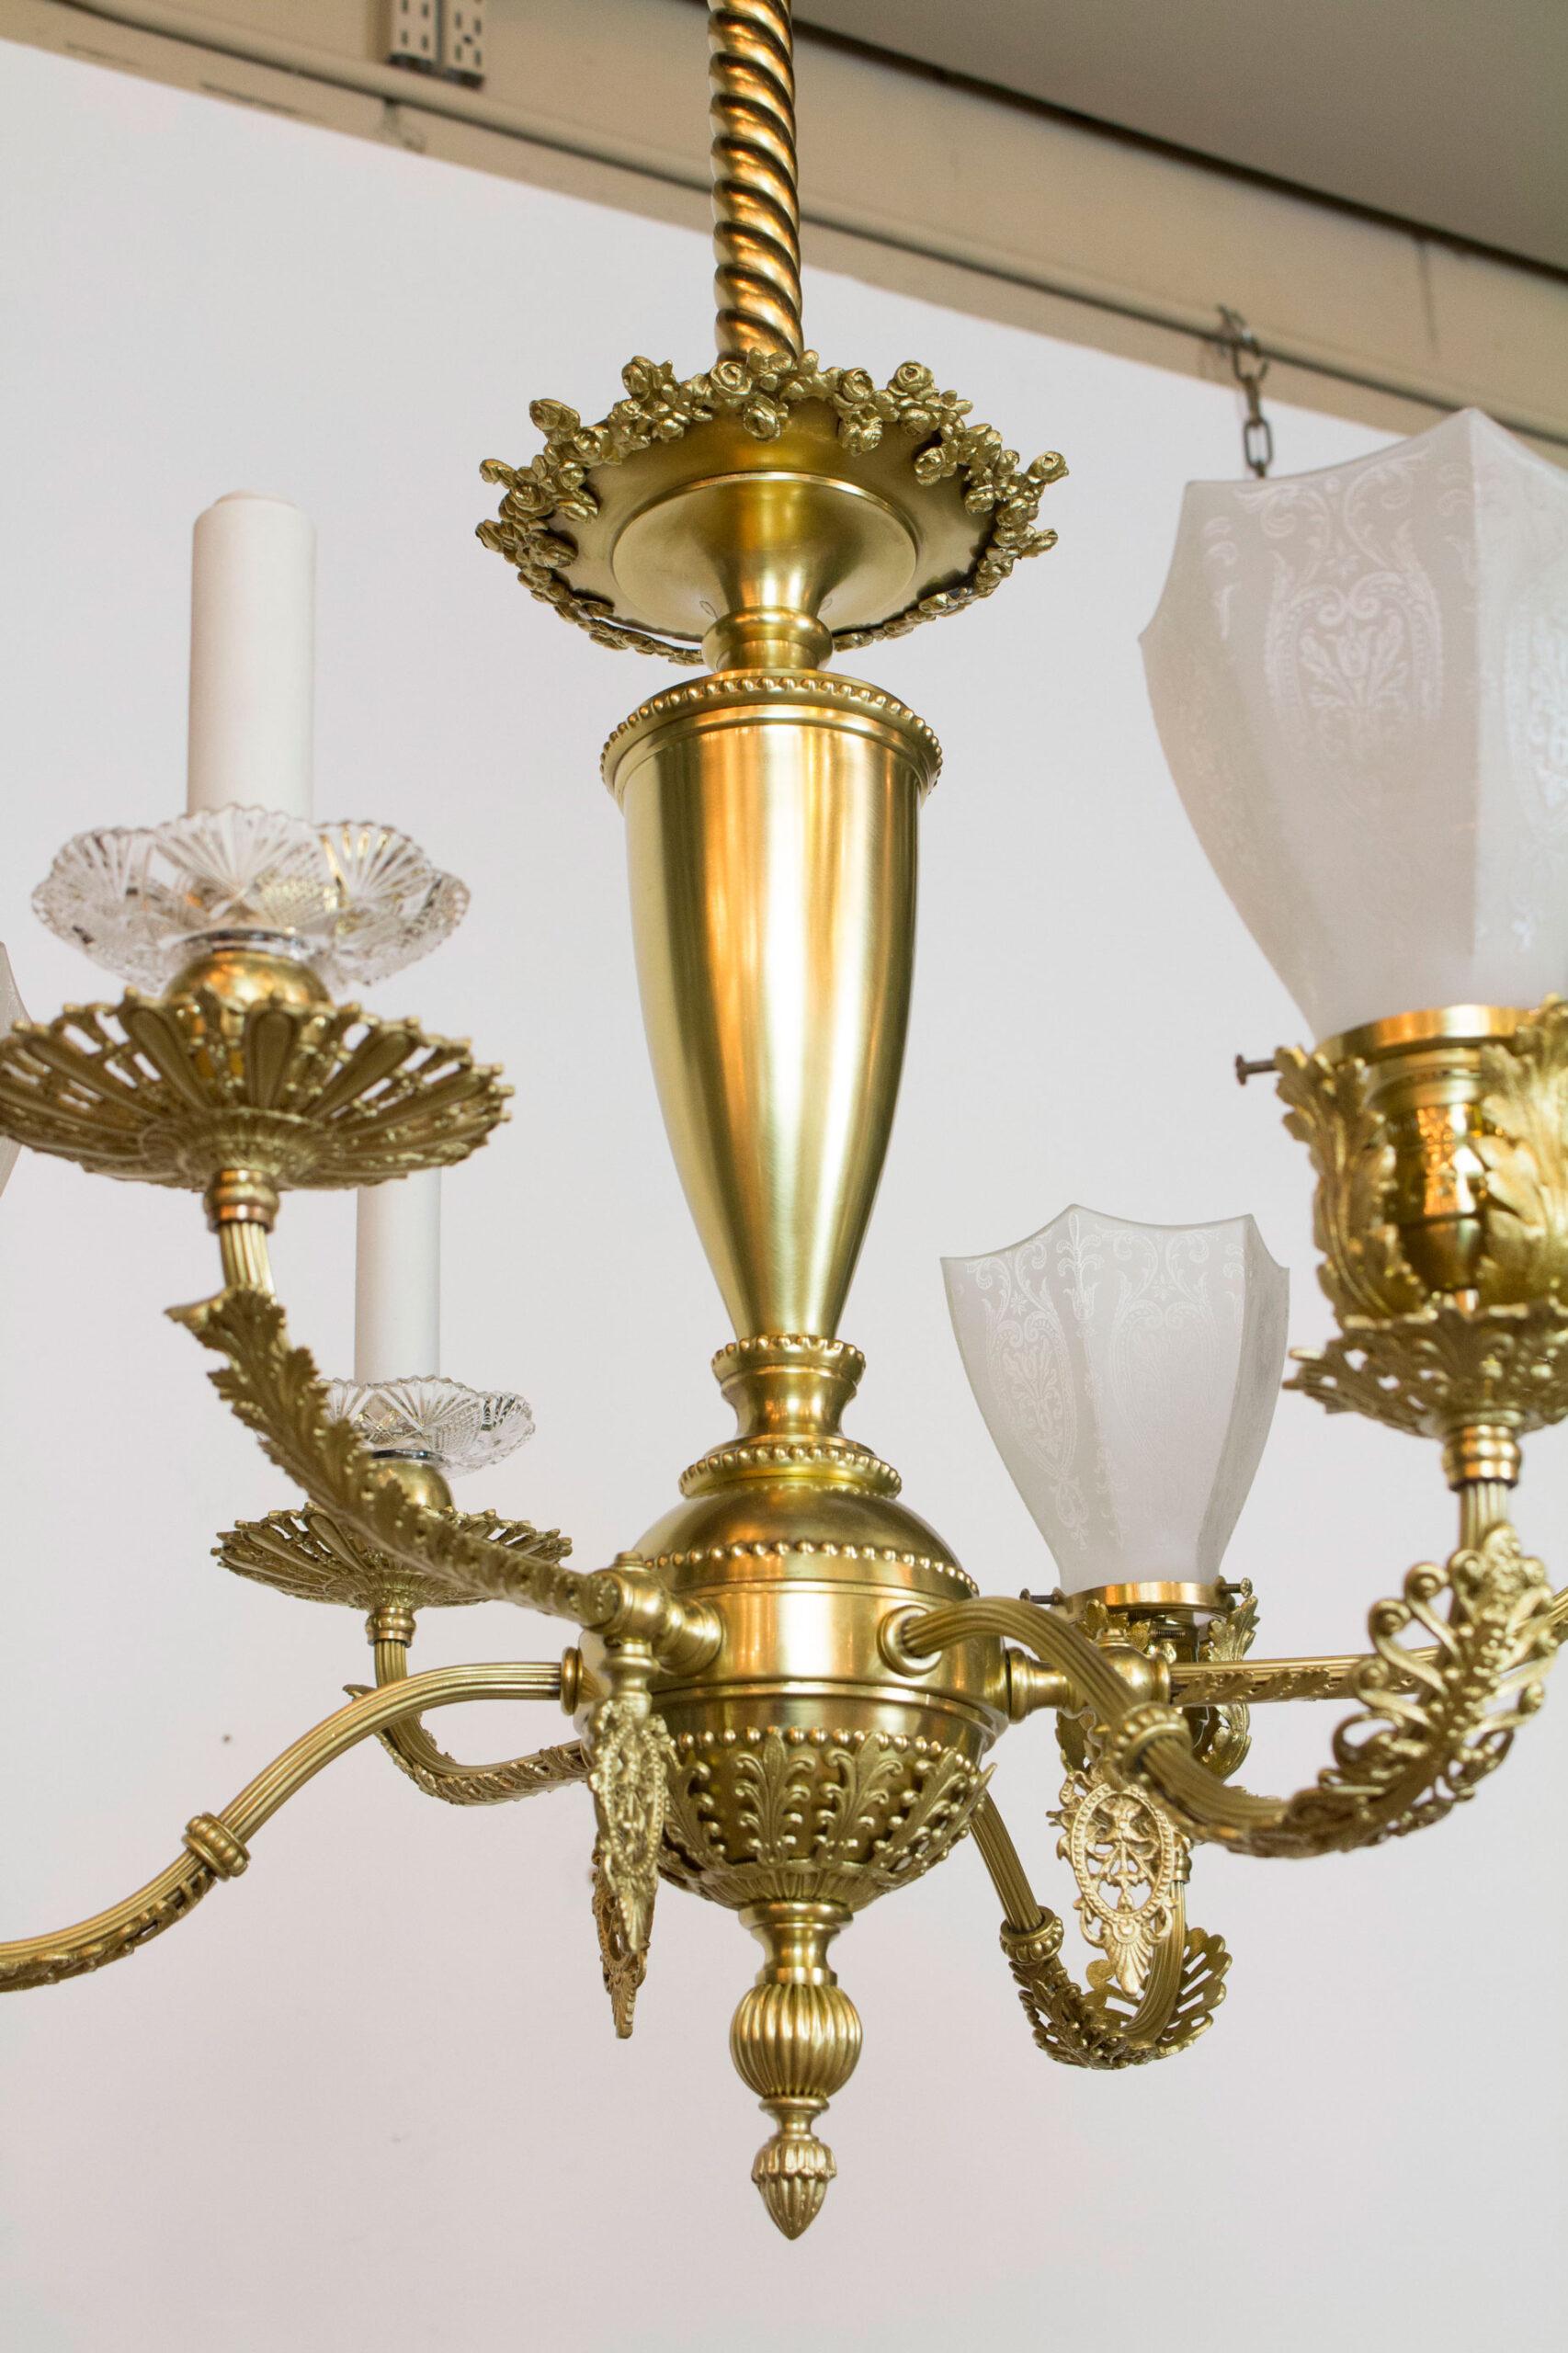 19th century Victorian delicate gas and electric fixture with original glass, original porcelain candle covers and bobeches. Six lights total, three originally electric with glass, and three originally with gas jets with porcelain candle covers.